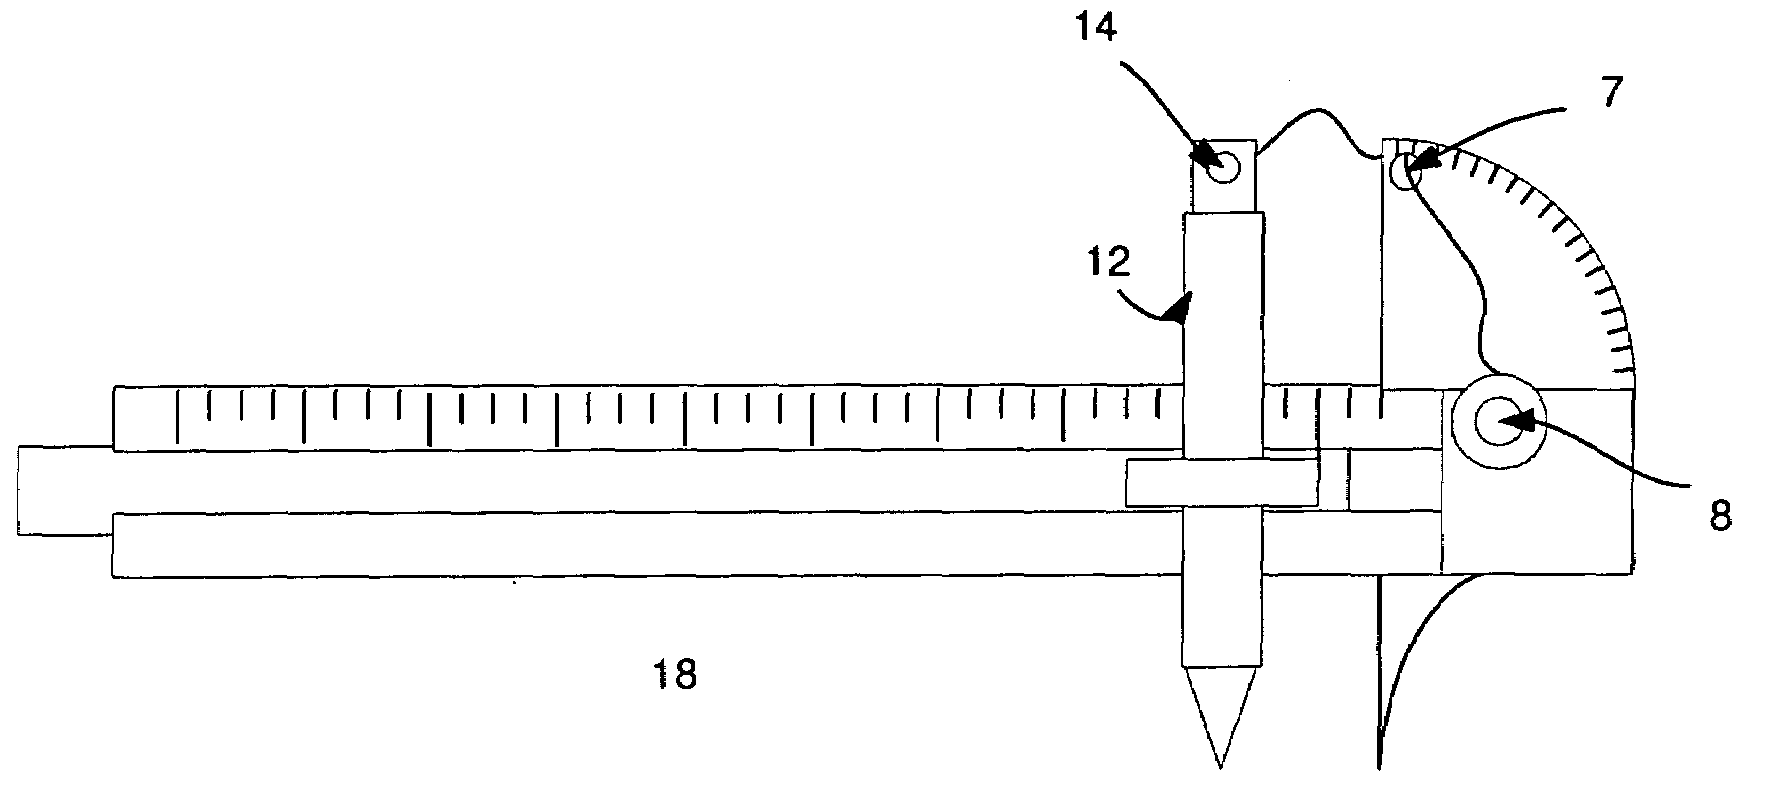 Thread ruler and a multi-function drafting instrument